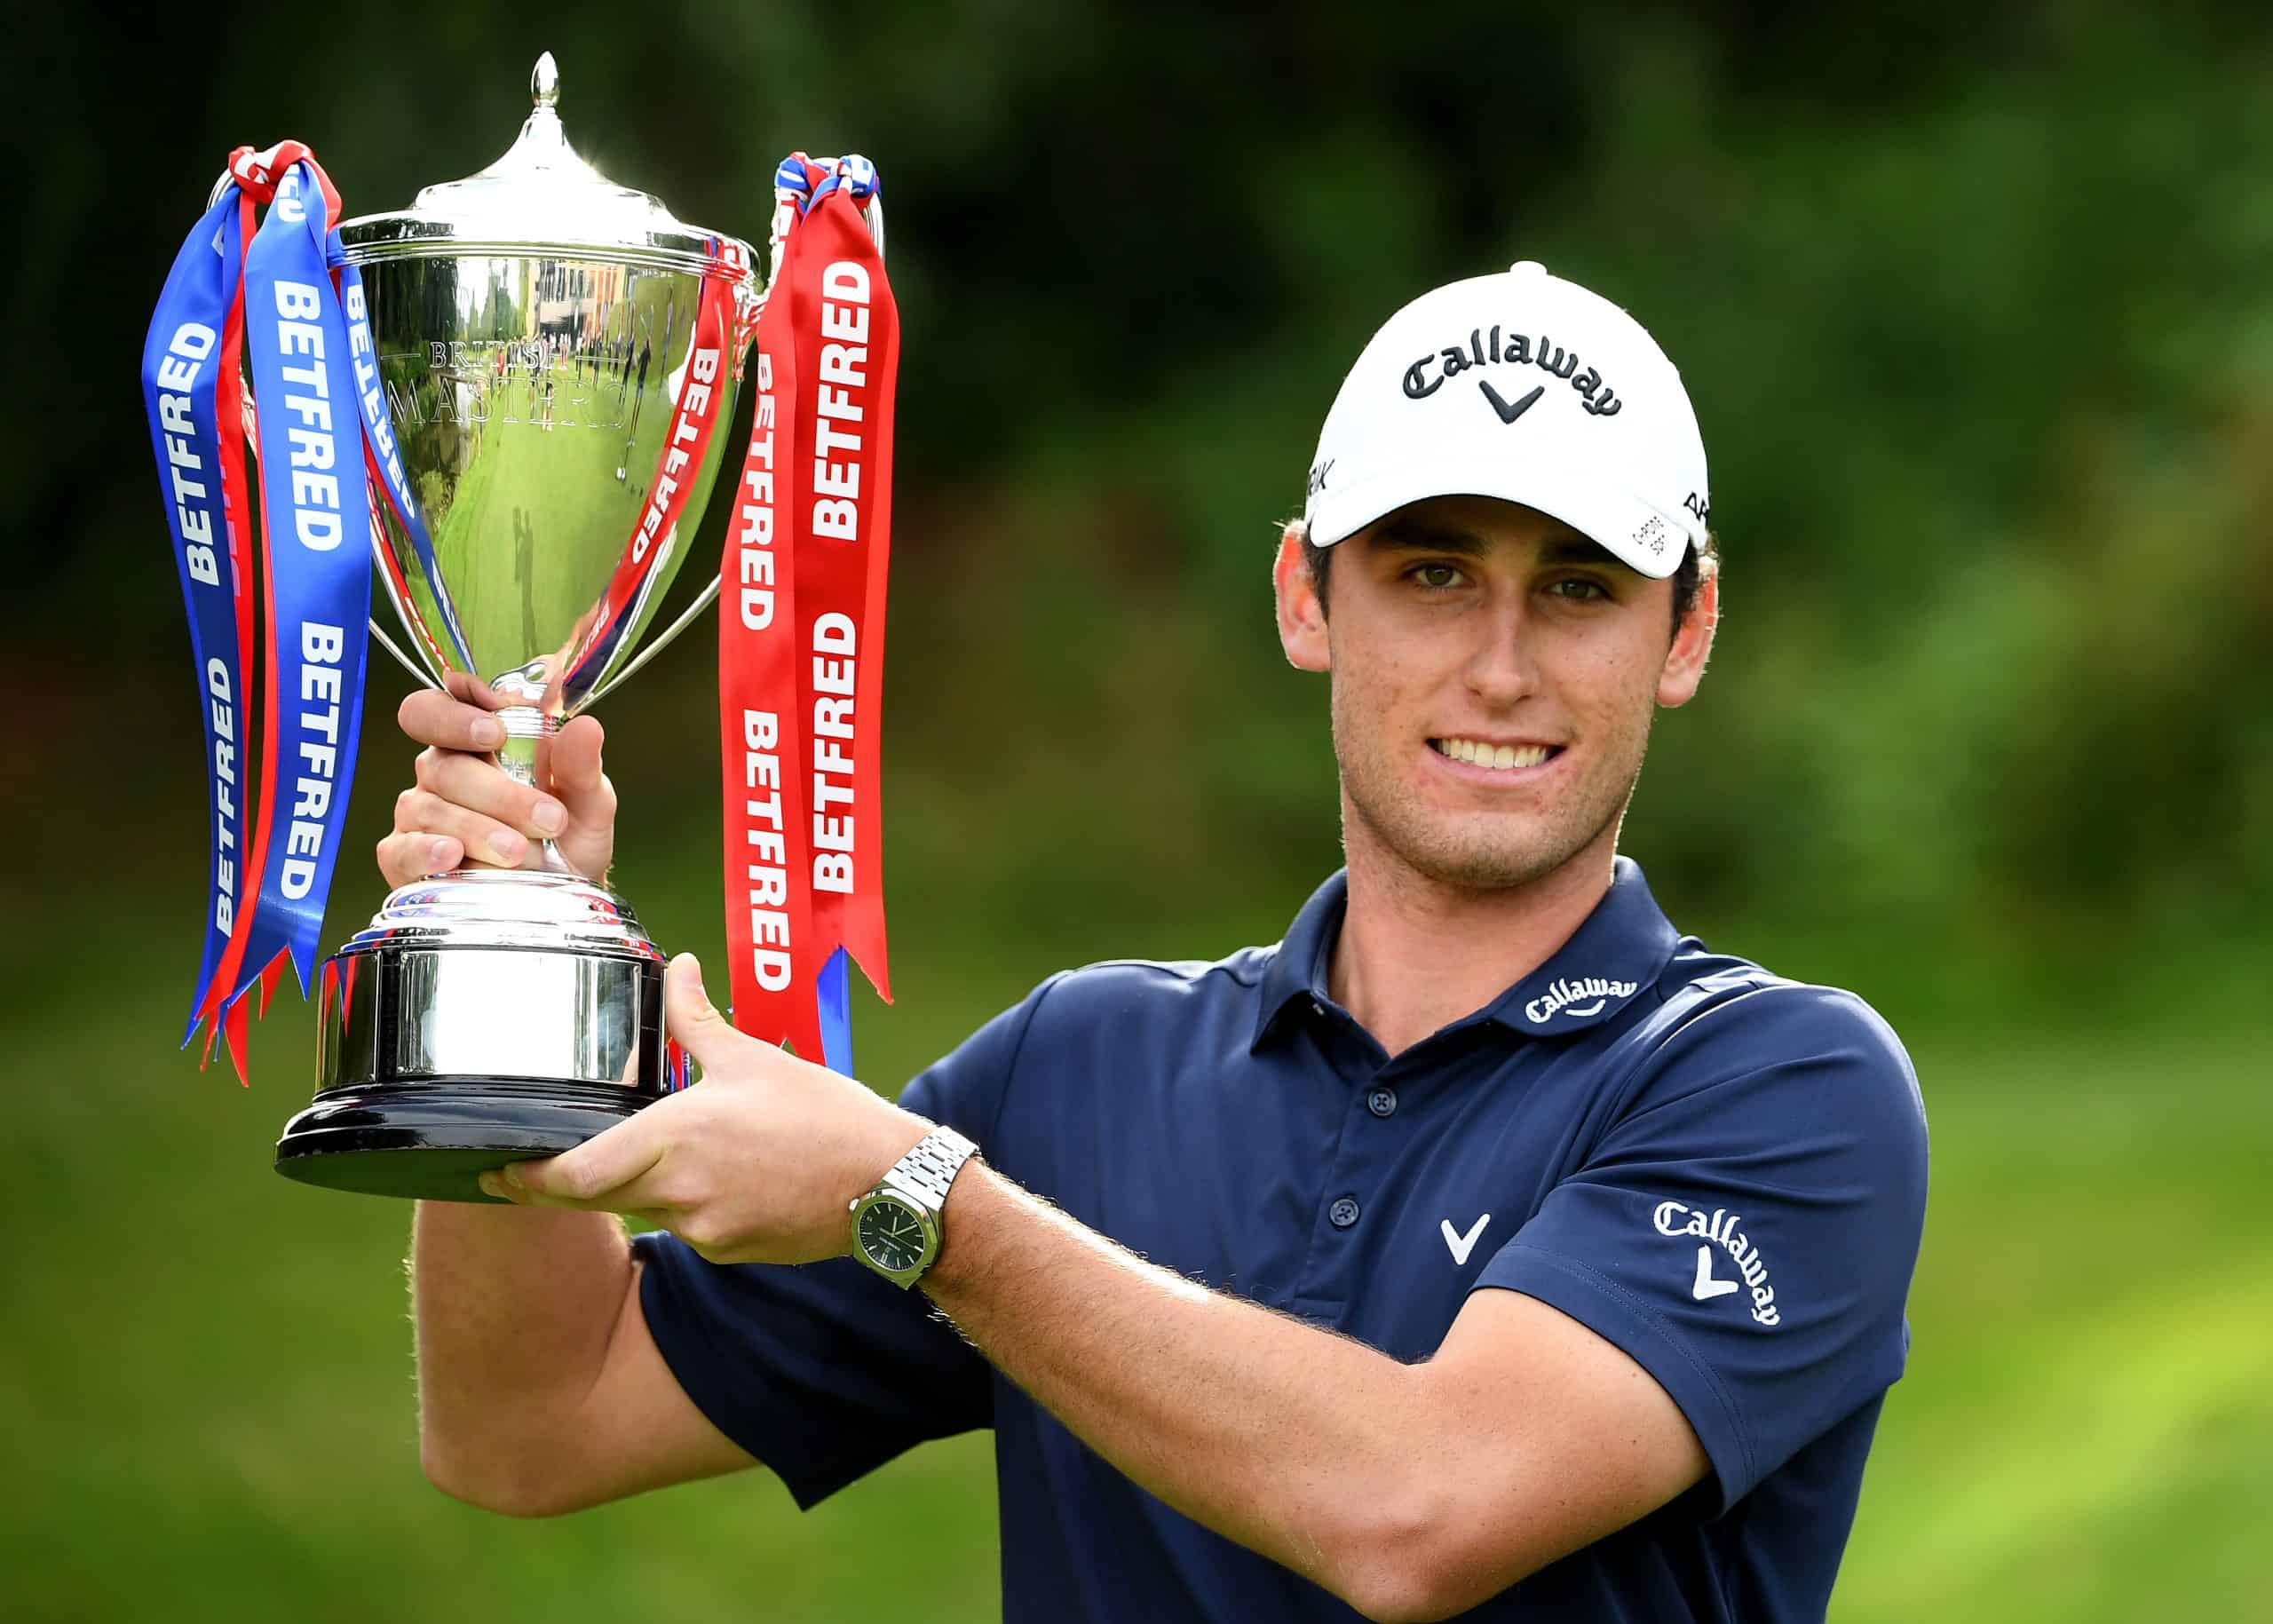 Renato Paratore - On the fast track to success - Worldwide Golf